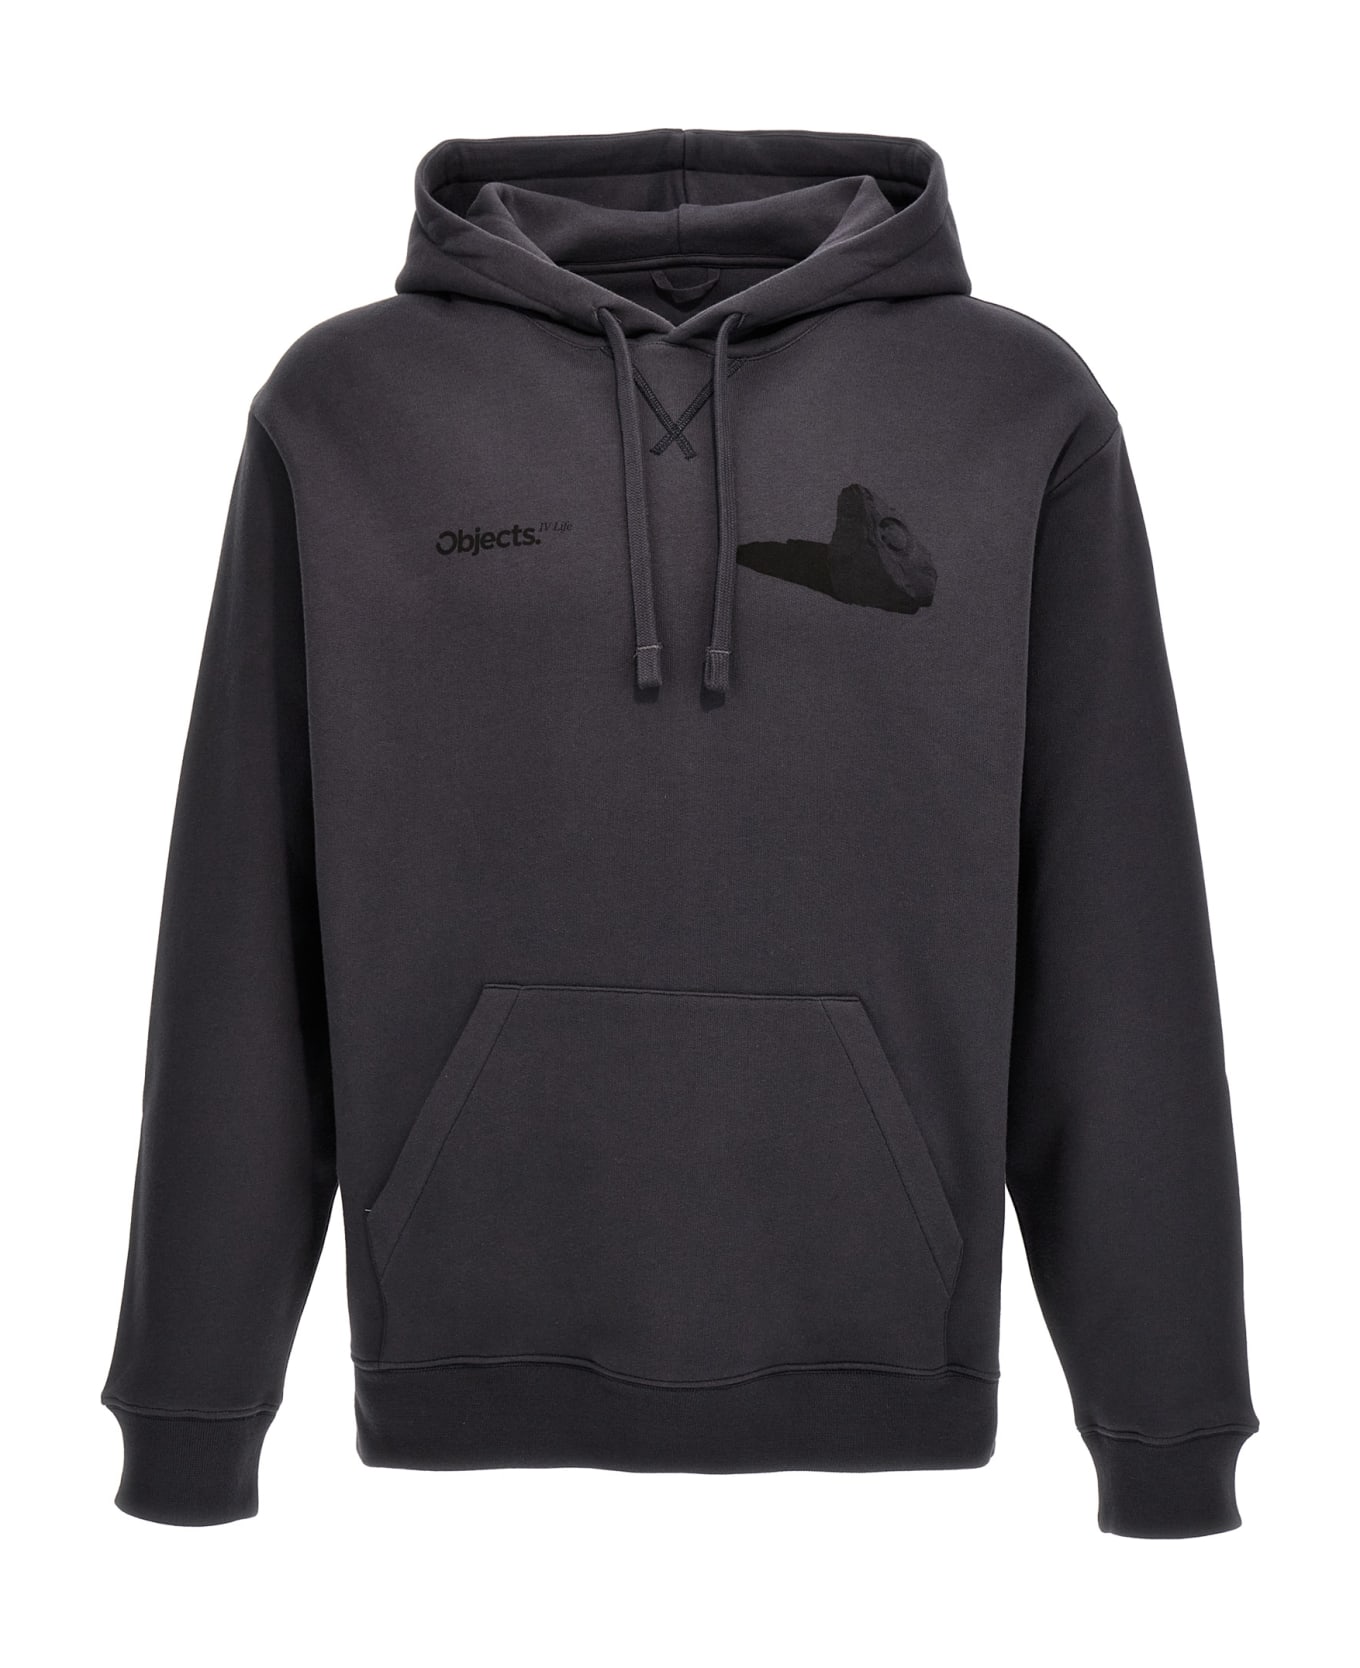 Objects Iv Life 'boulder Print' Hoodie - Gray